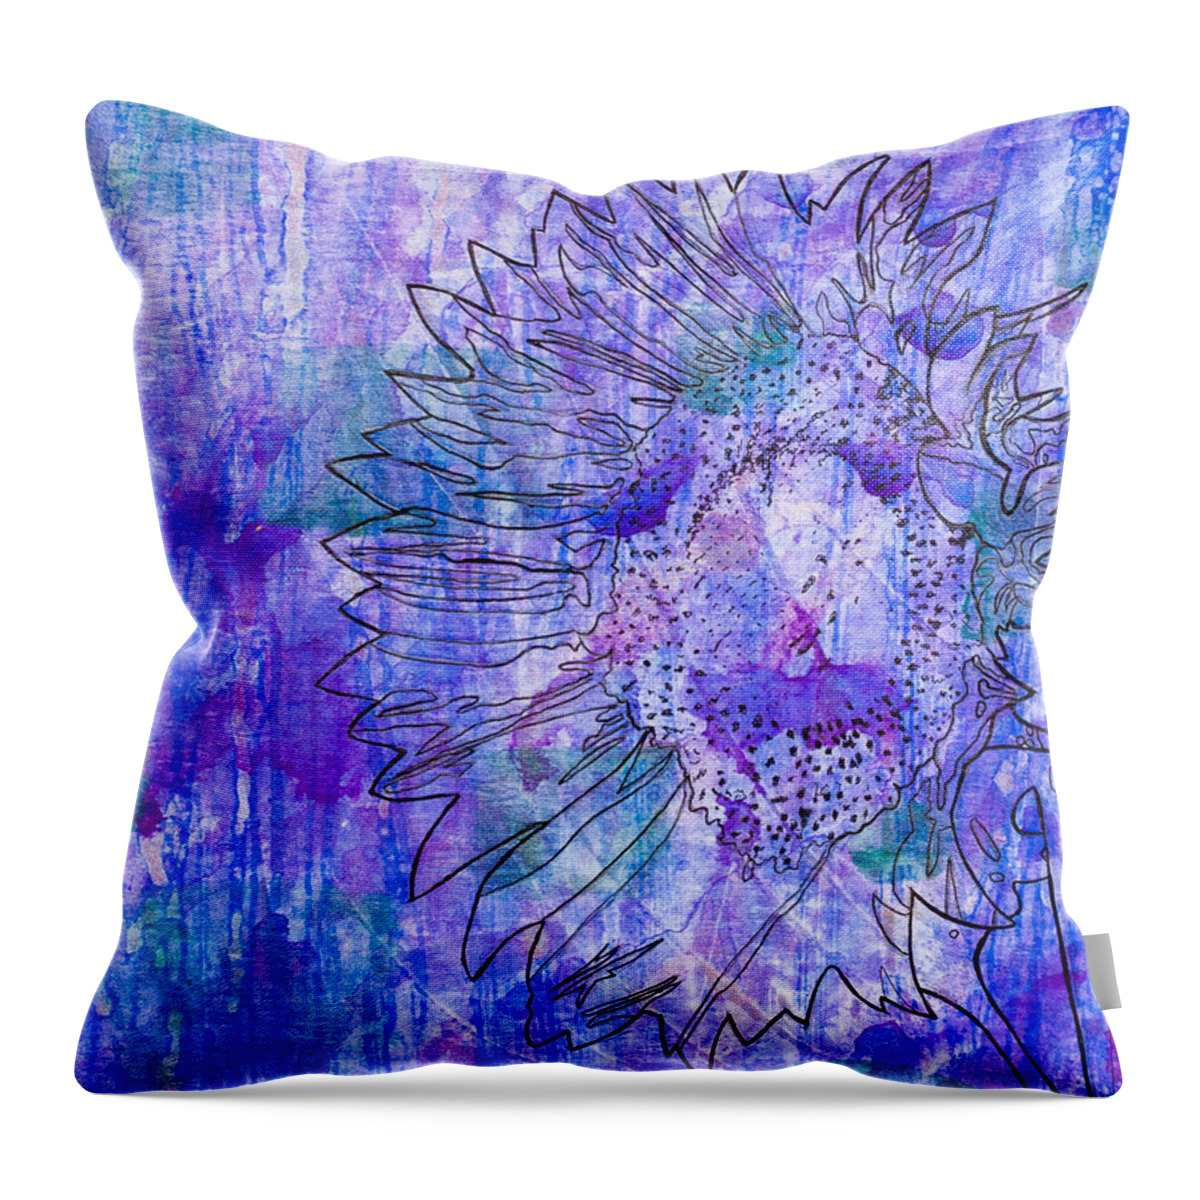 Abstract Throw Pillow featuring the painting Sunflower by Stefanie Forck